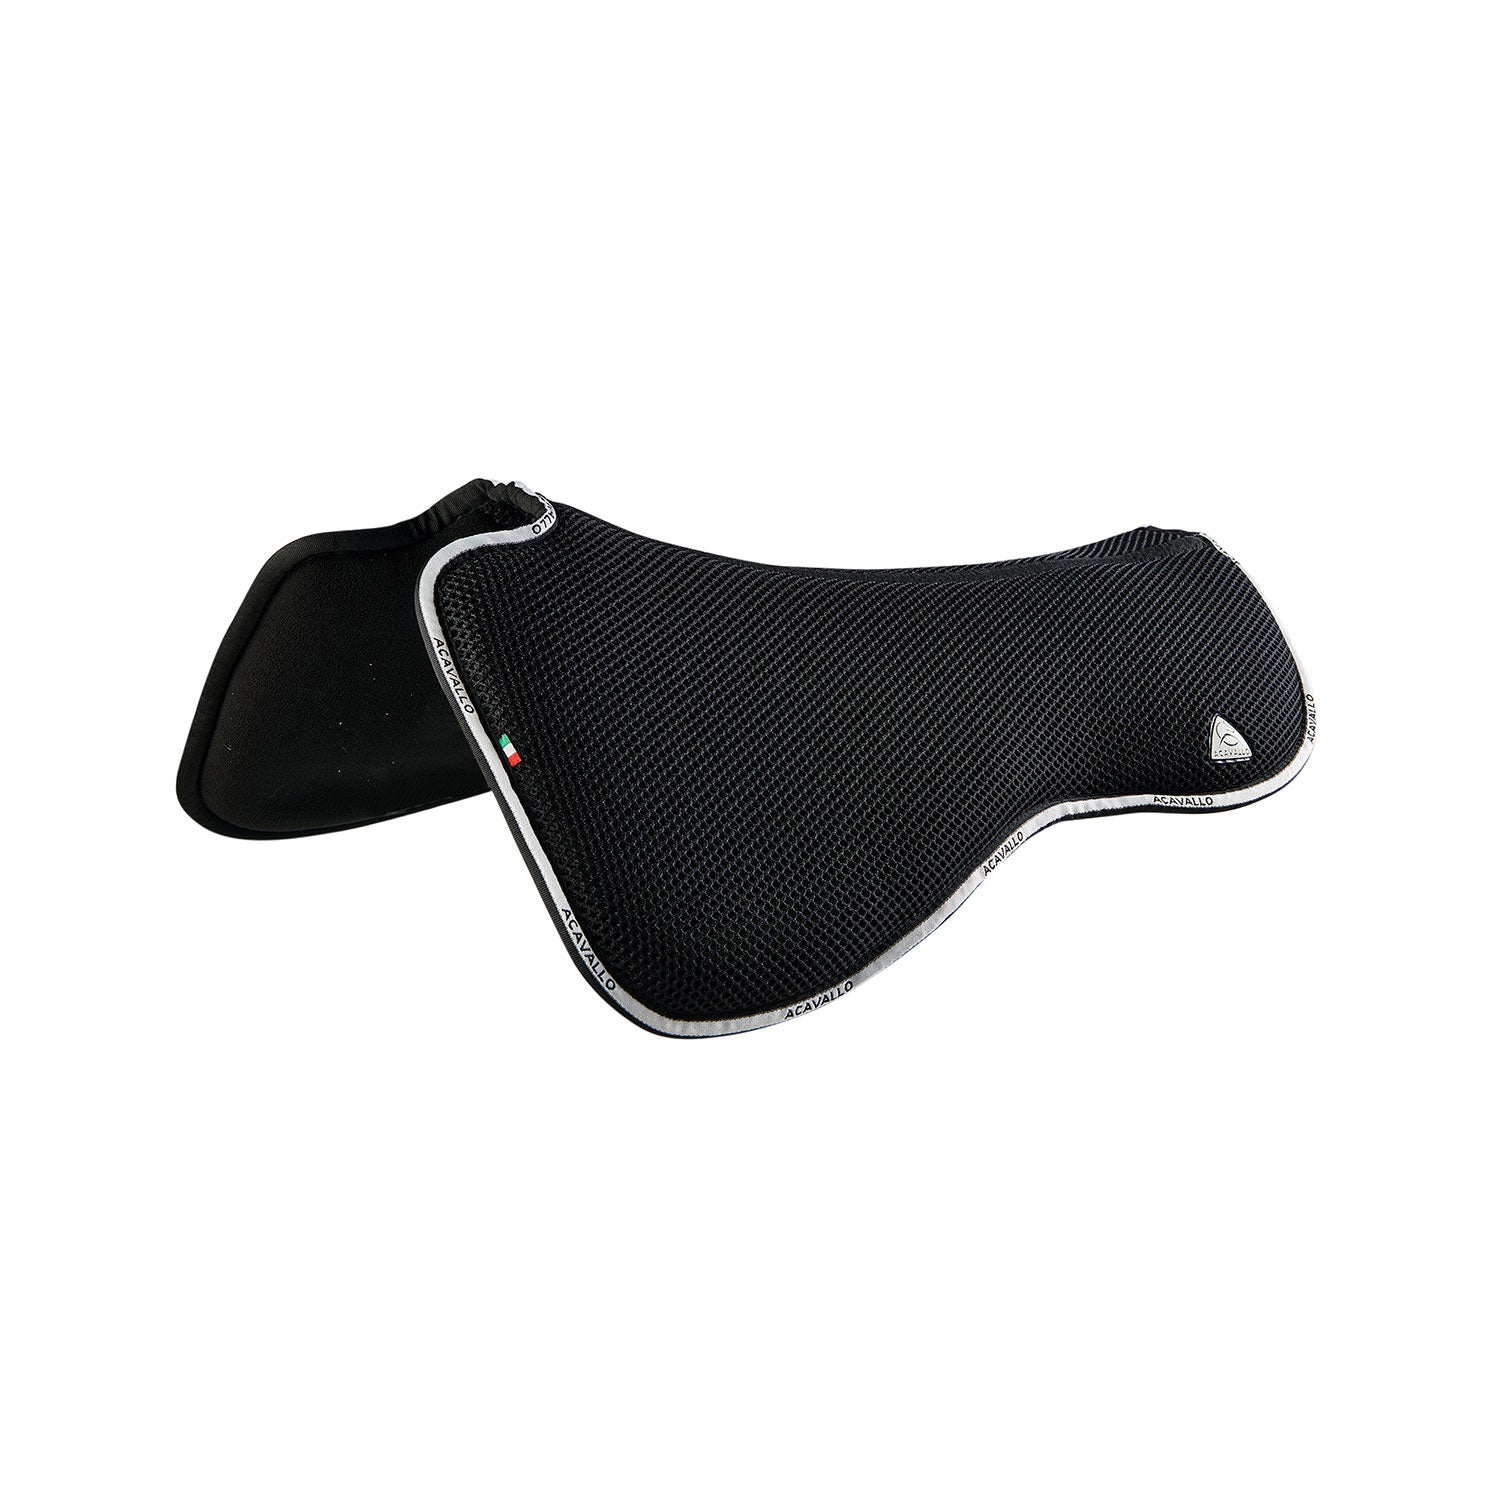 Pad Withers shaped spine free dressage pad 3D spacer microfleece - Reitstiefel Kandel - Dein Reitshop